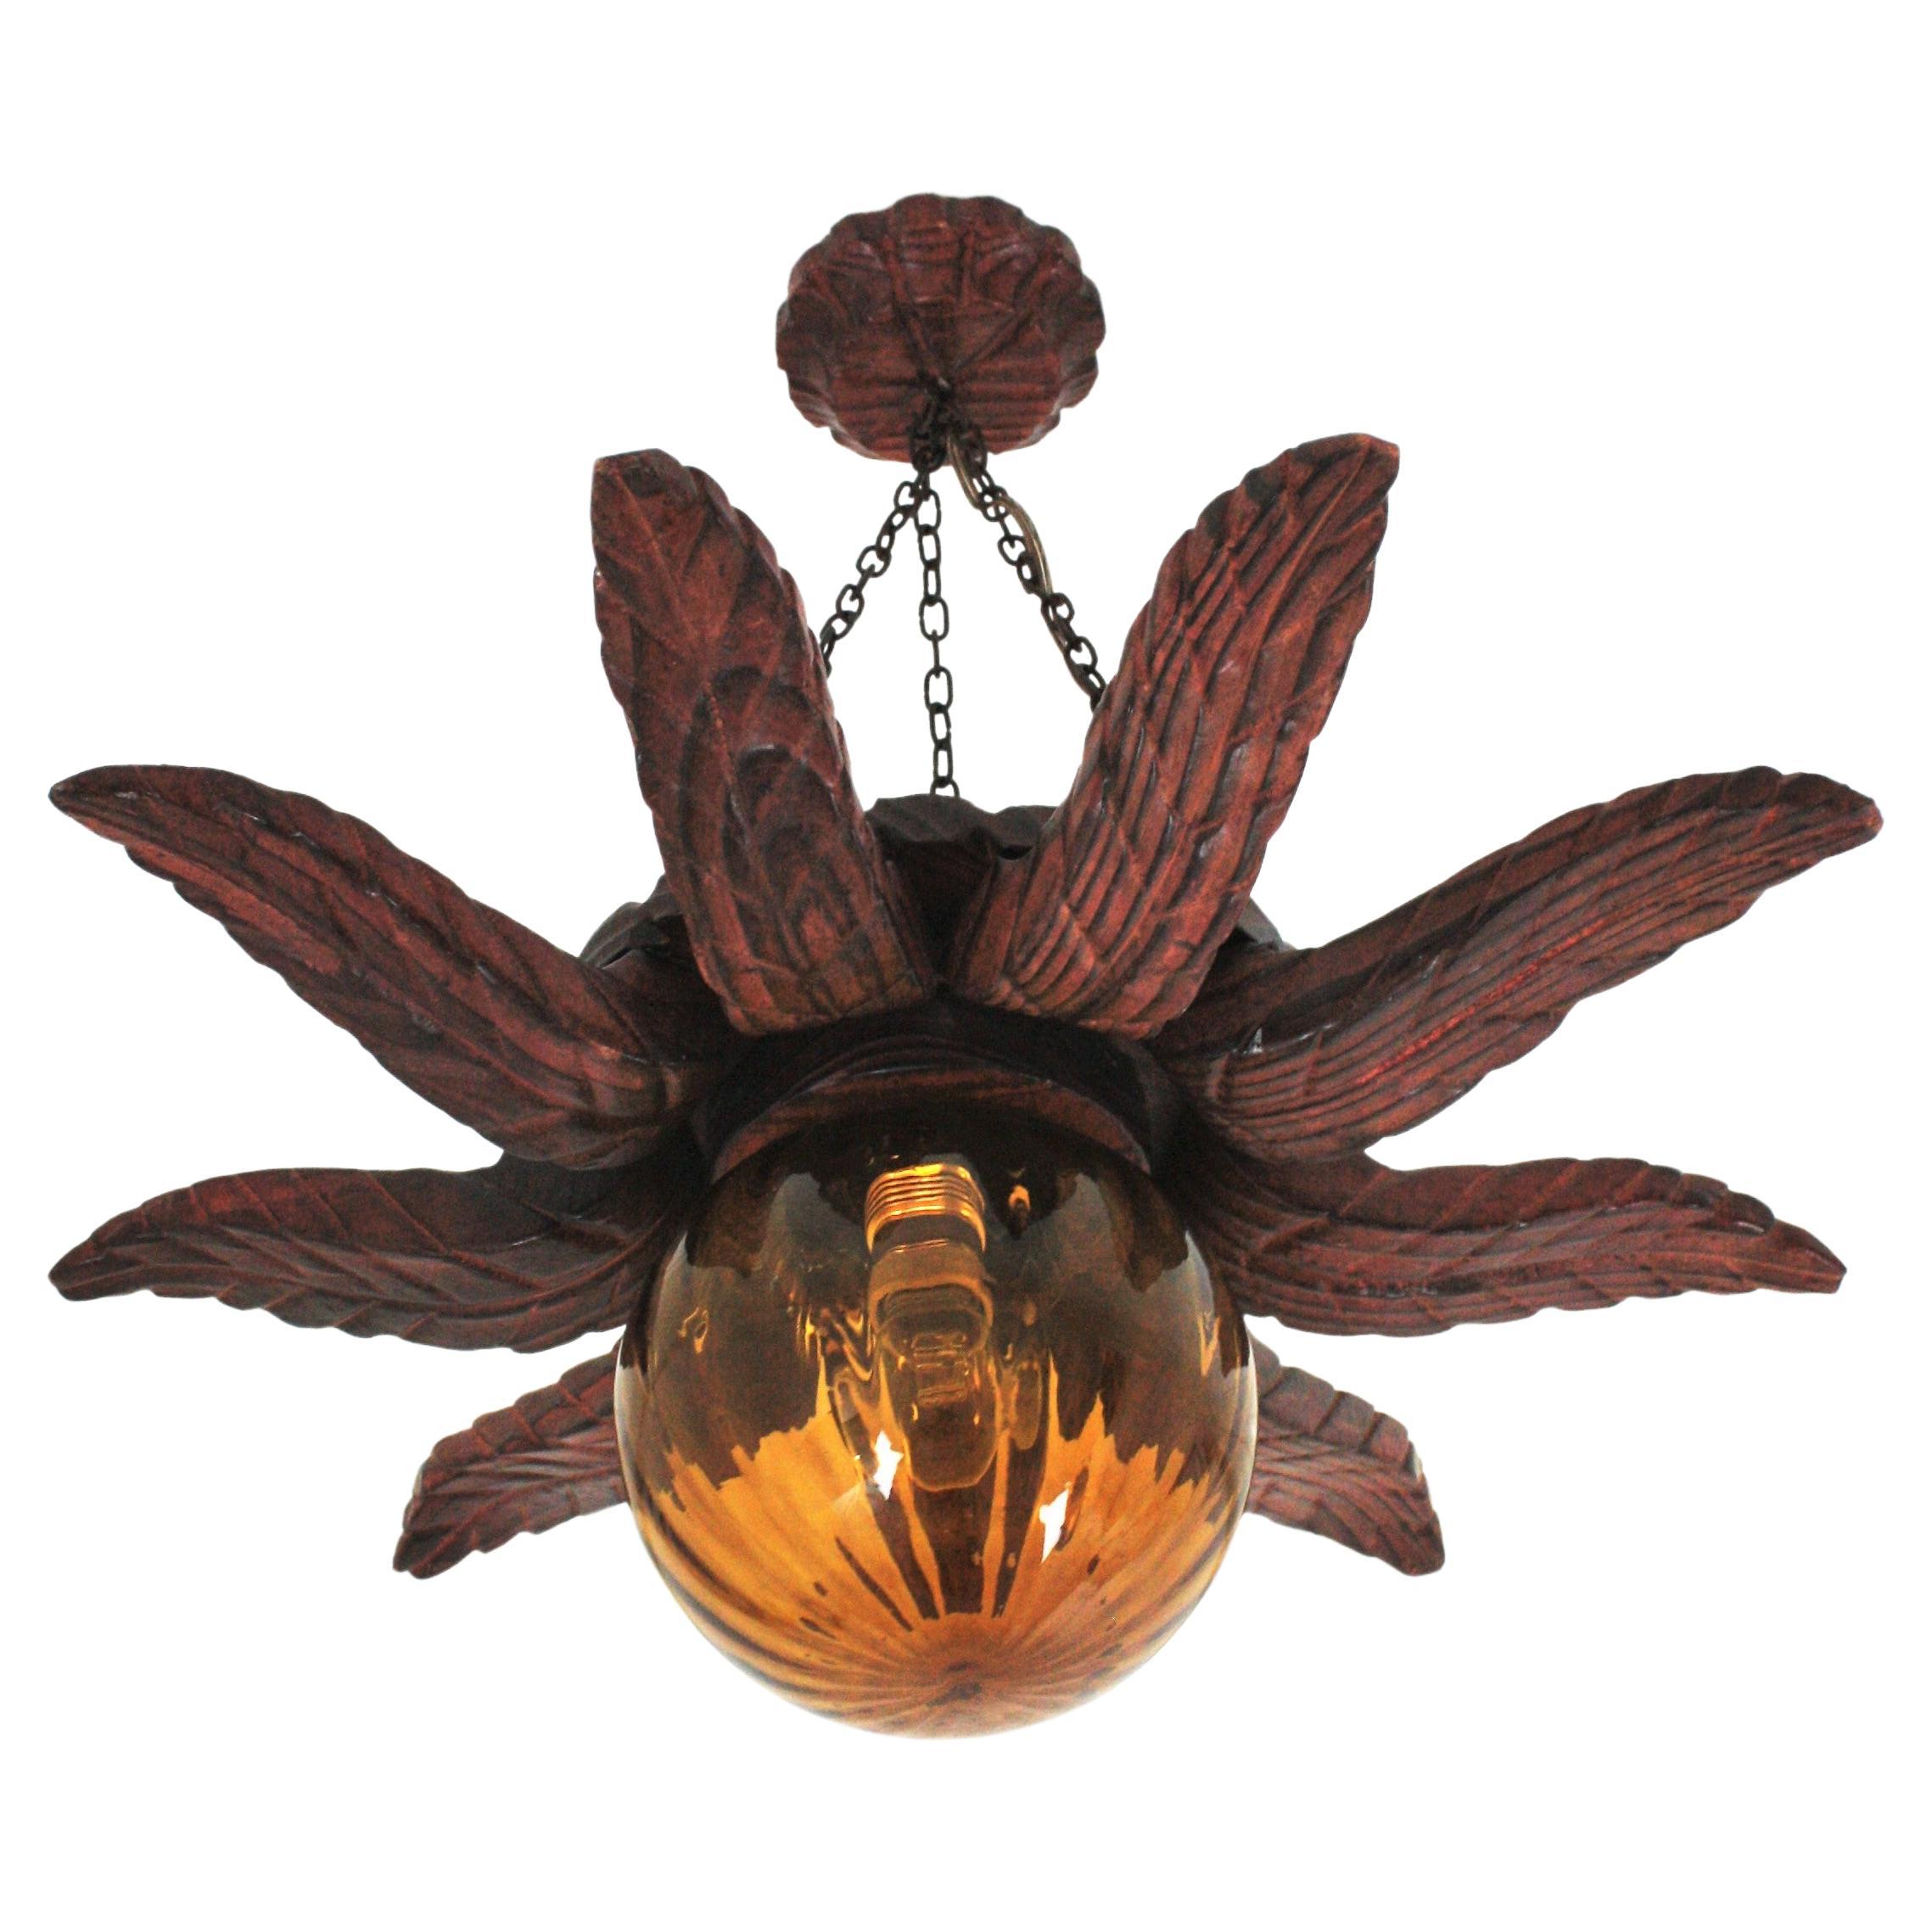 Handcarved pine wood sunburst or starburst ceiling light fixture with amber glass globe lampshade. Spain, 1940s
This ceiling light pendant lamp has an eye-catching construction. The sunburst backplace in carved wood and sunburst or starburst shape